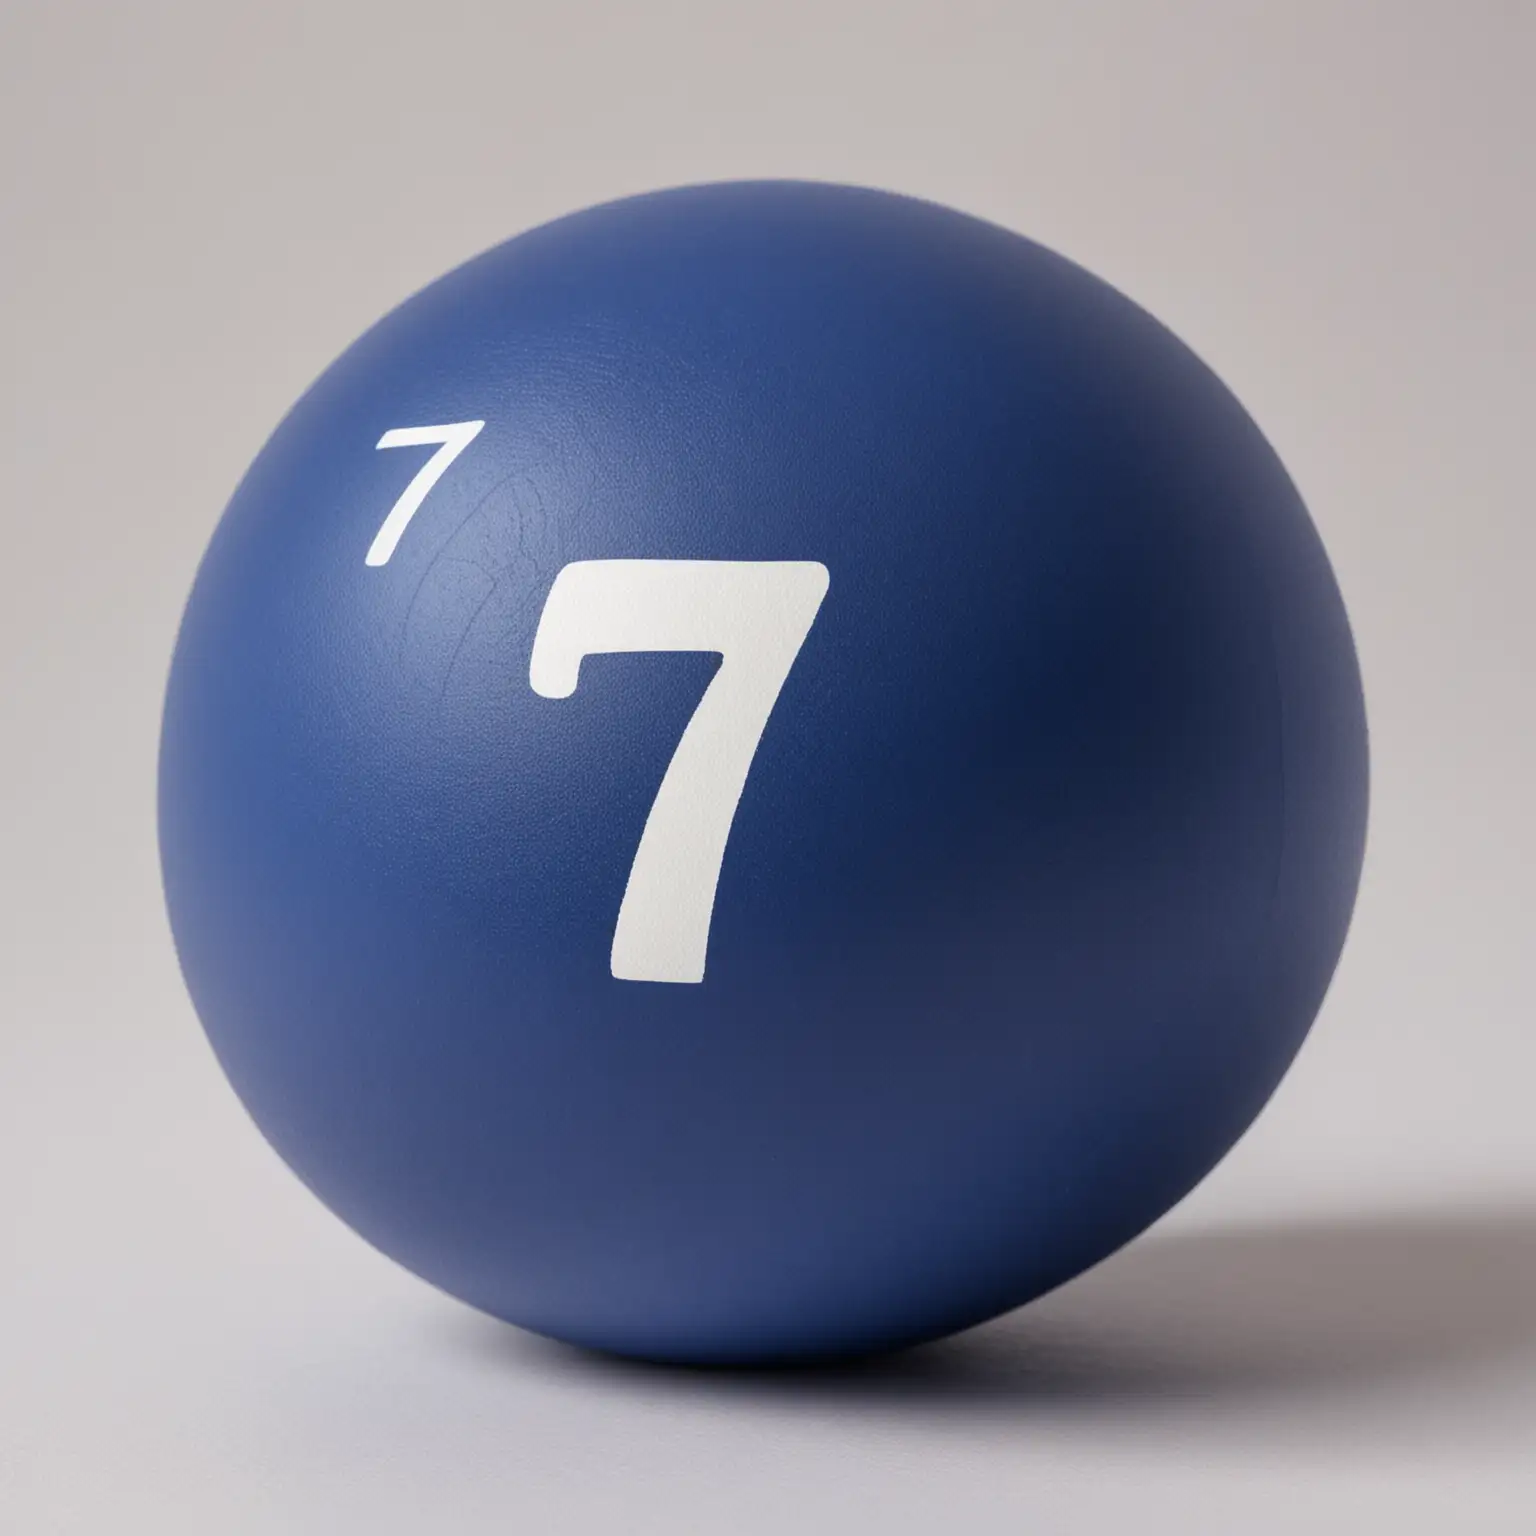 dark blue matt ball with one letter "7" printed on the ball
